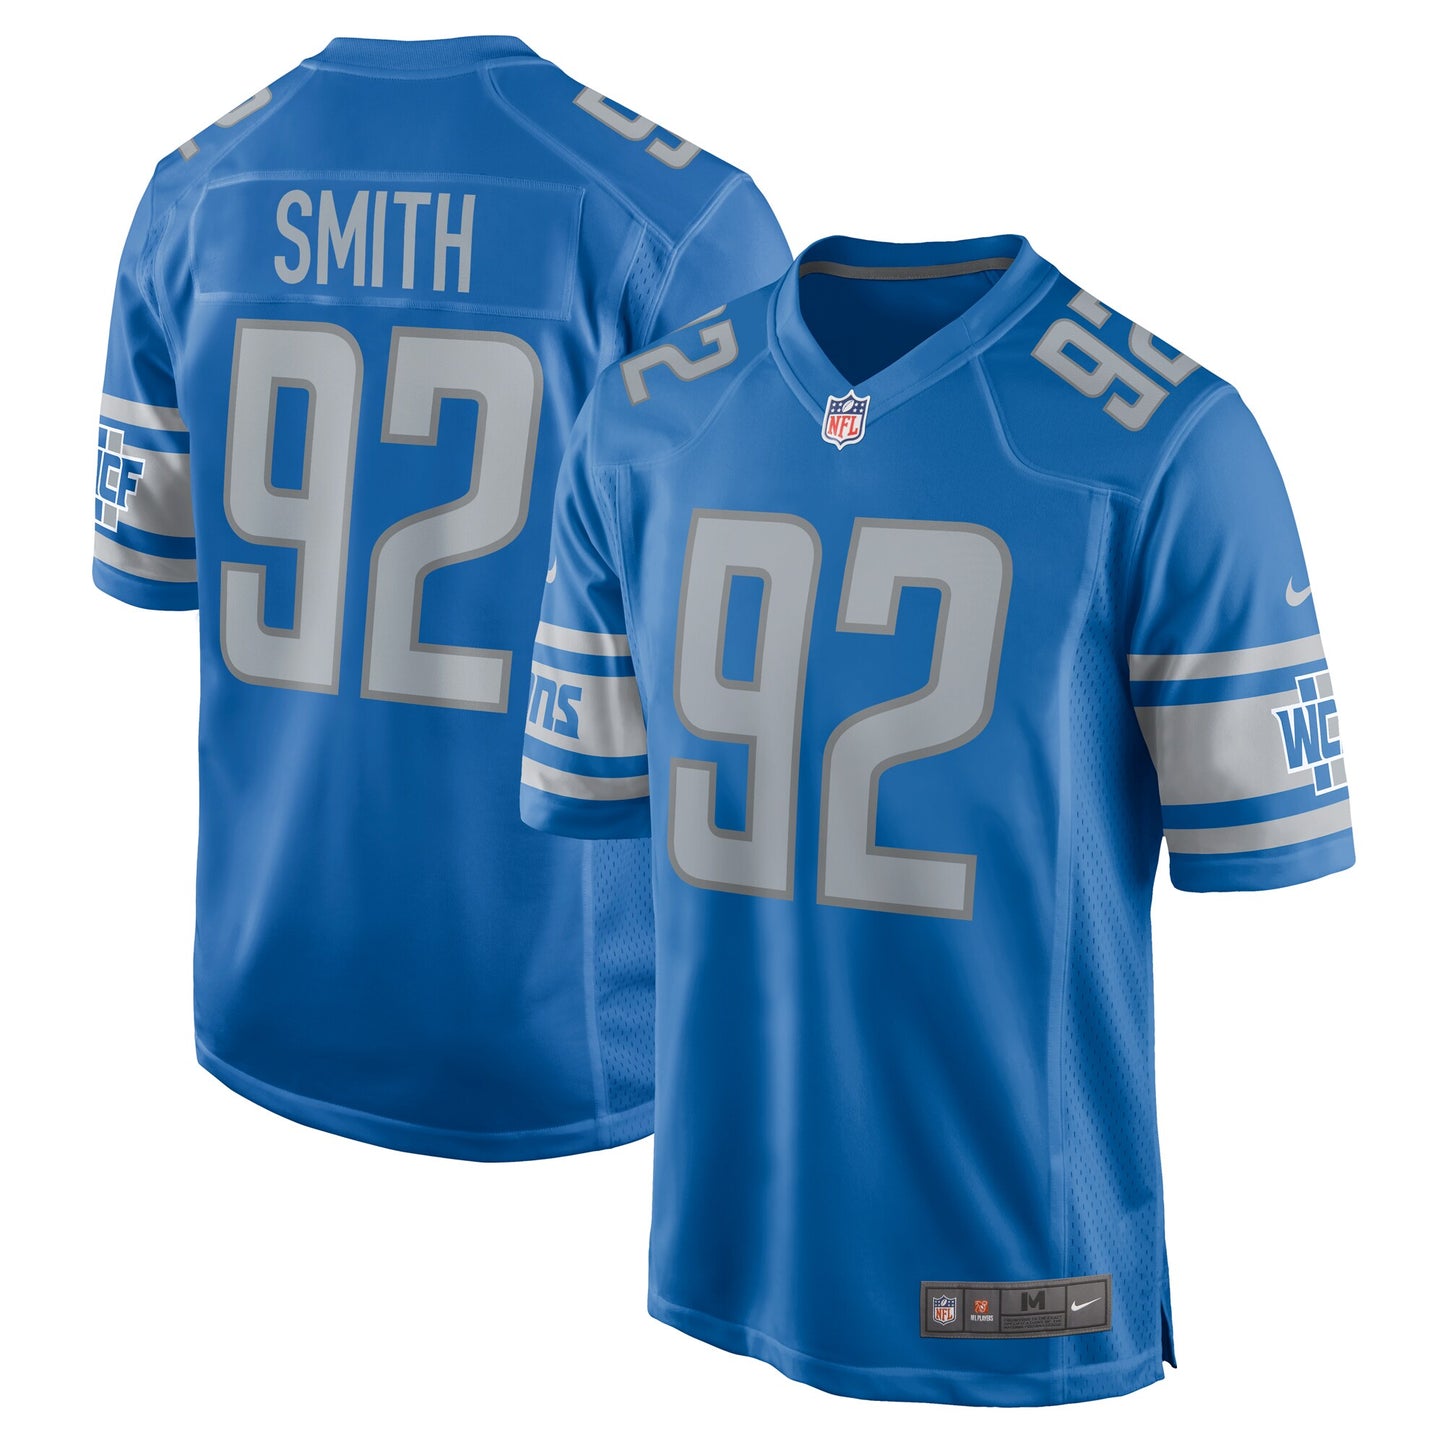 Chris Smith Detroit Lions Nike Team Game Jersey -  Blue